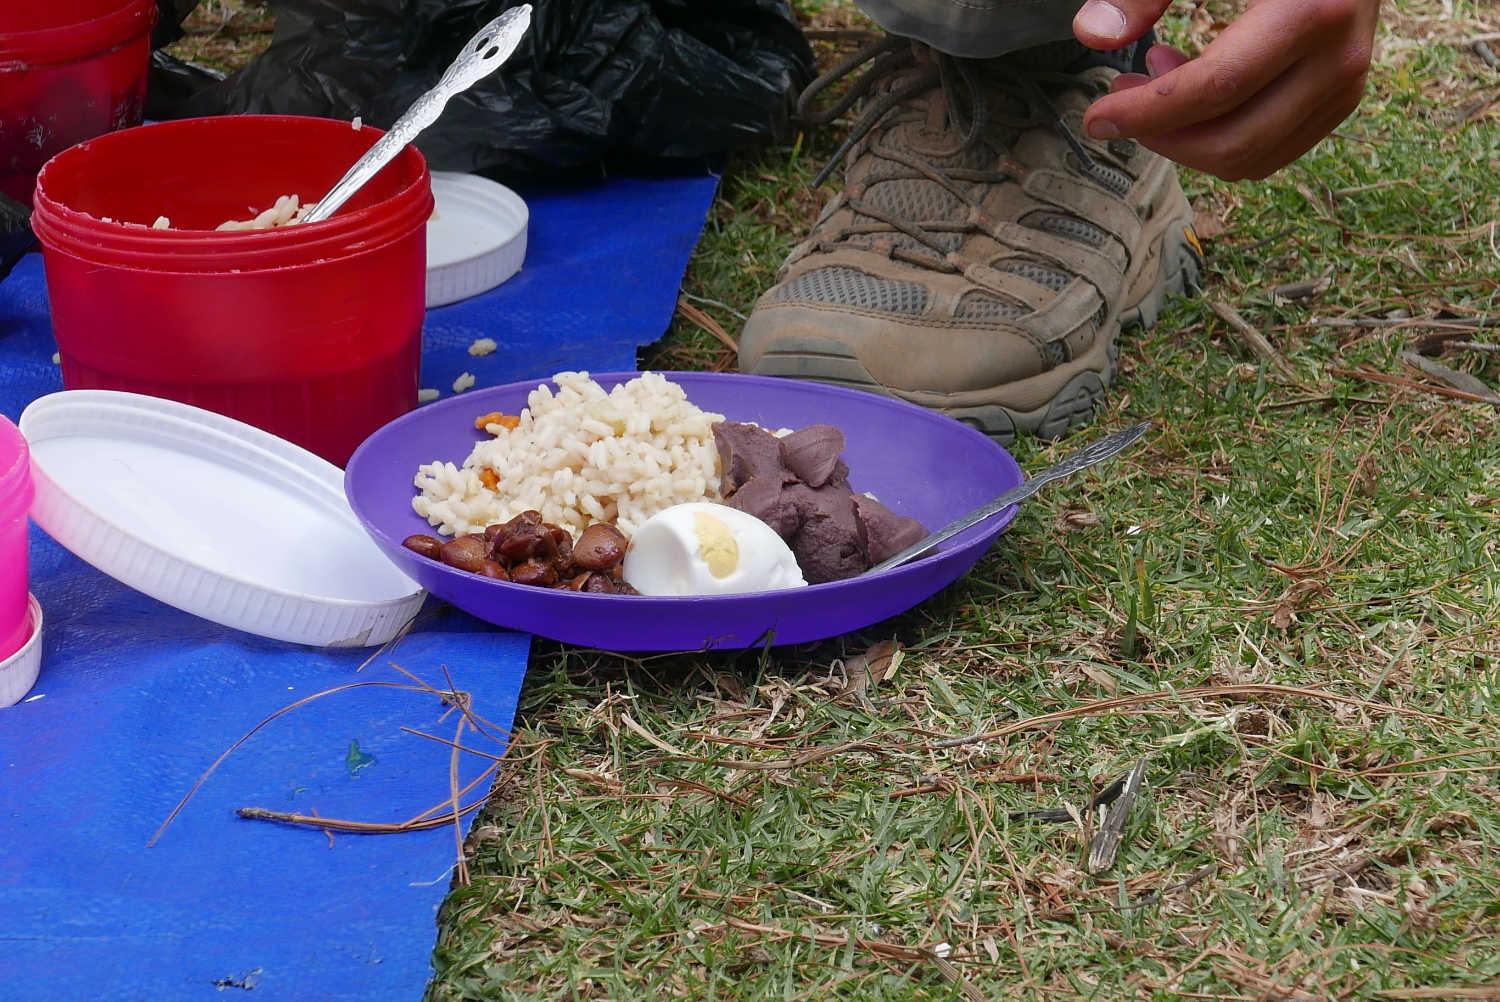 The lunch on the second day of the hike to Lake Atitlan